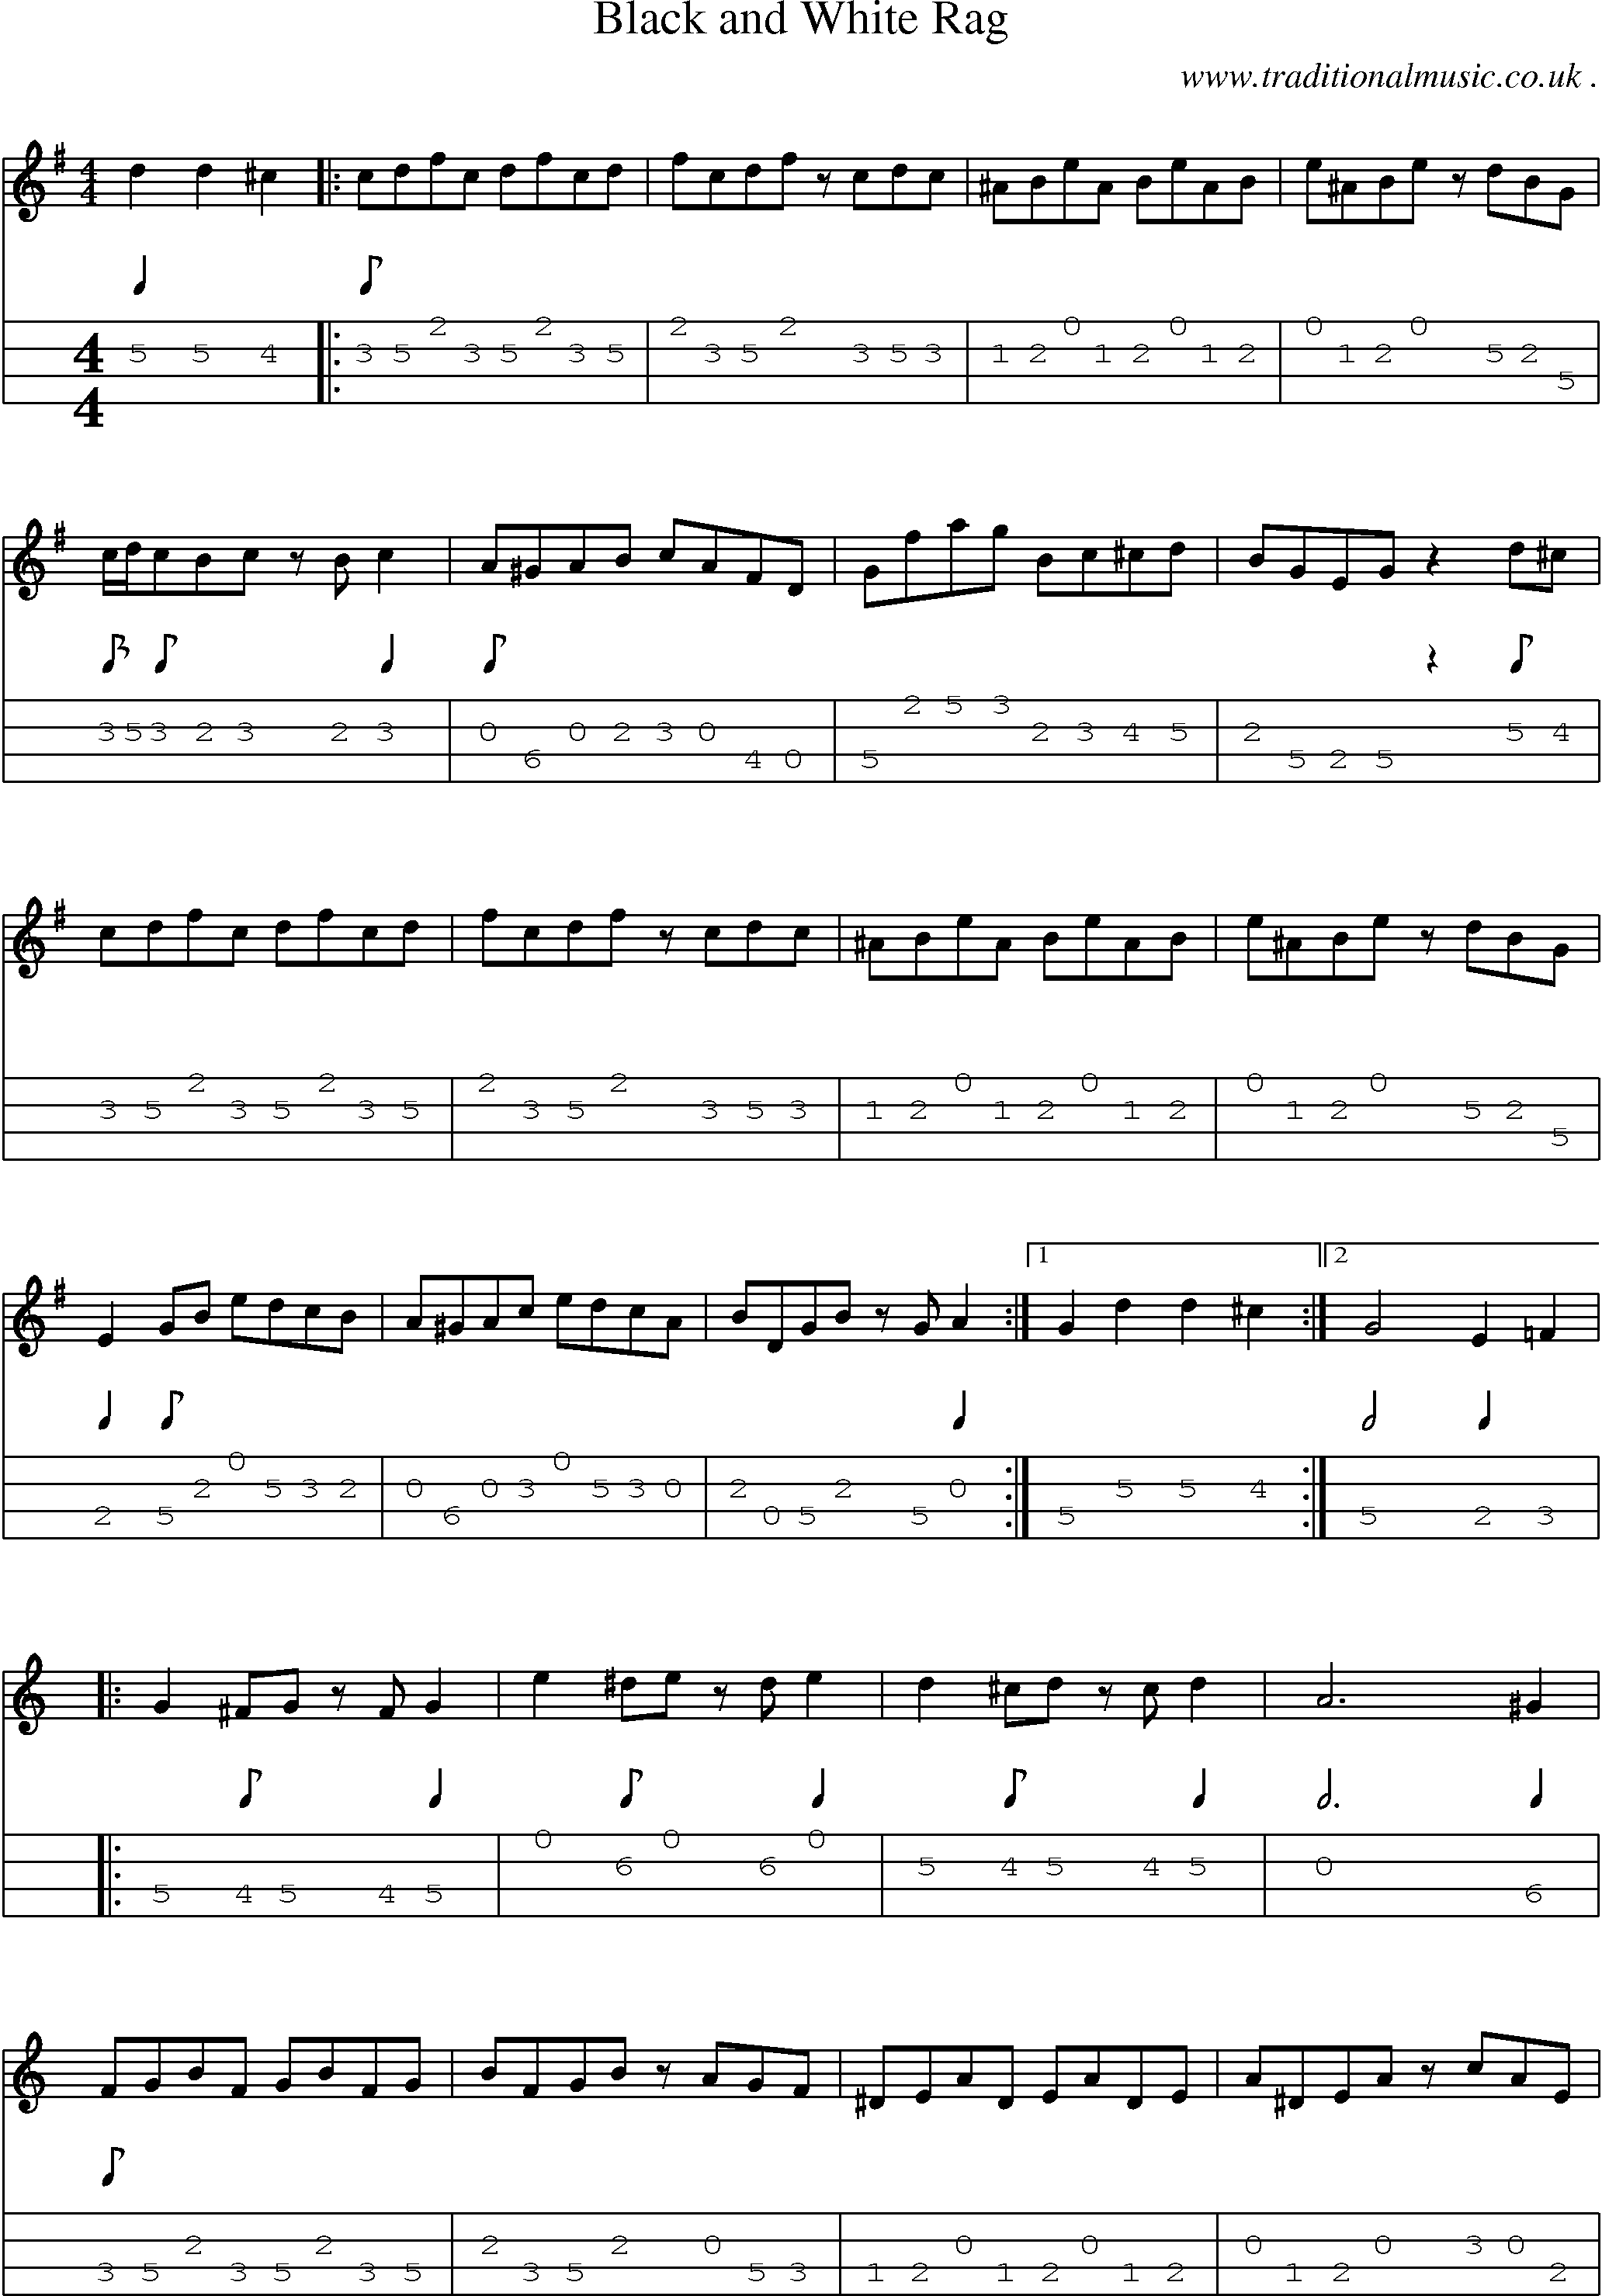 Music Score and Mandolin Tabs for Black And White Rag